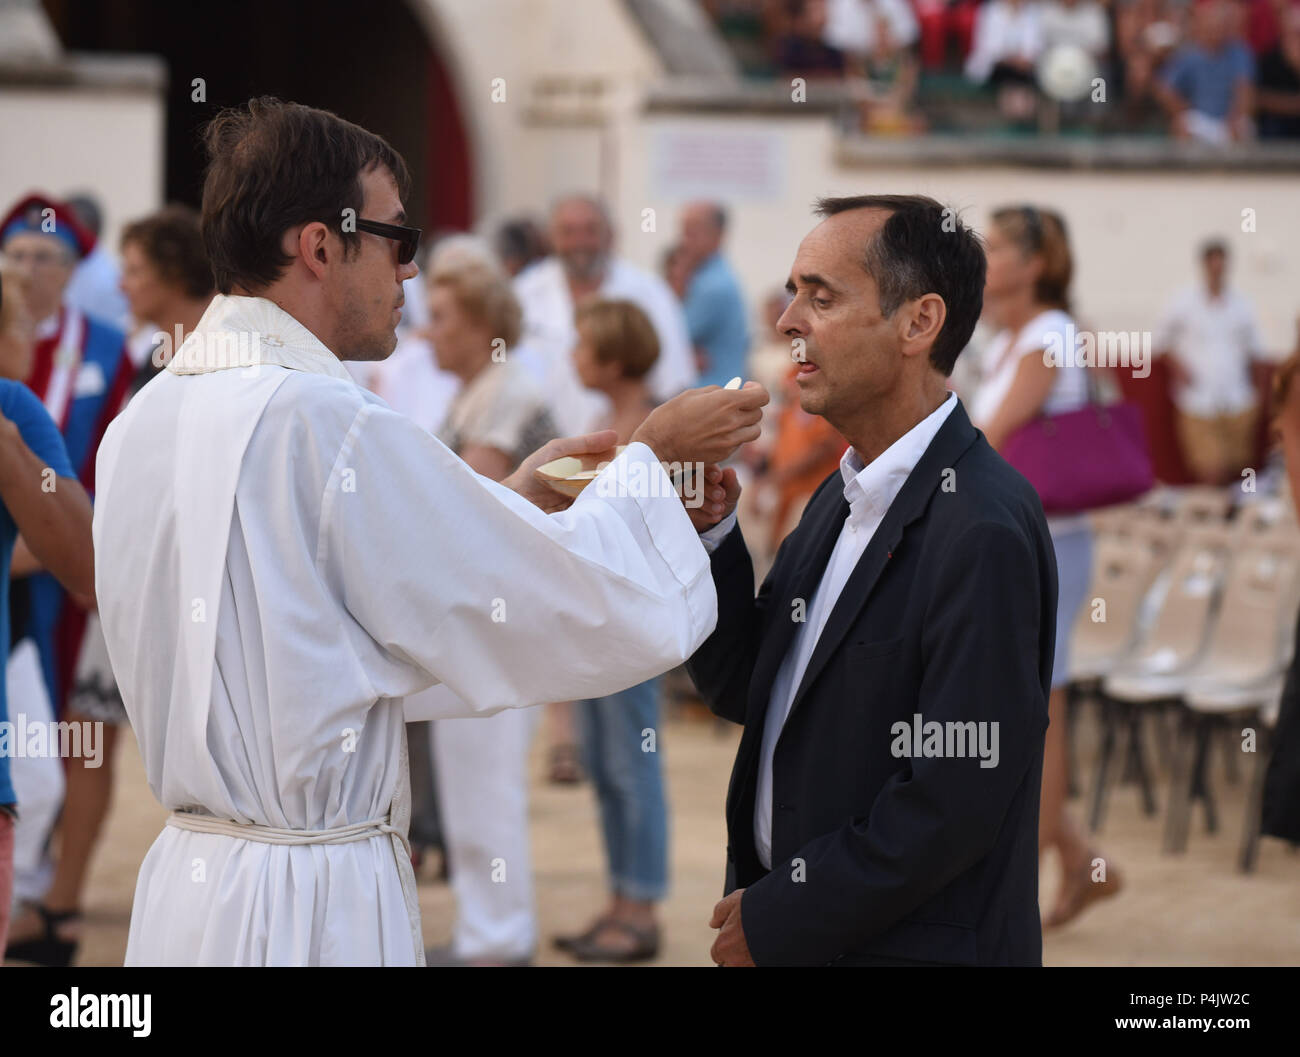 August 12, 2015 - Beziers, France: Beziers mayor eat sacramental bread during a Catholic mass in the bullfighting arena before the opening of the 'Feria', a summer festival of street parties and bullfighting. The town's new mayor, Robert Menard, has allowed the large public mass to take part in the arena as part of his municipal programme to reinvigorate the town's Catholic traditions. Le maire de Beziers Robert Menard recoit l'hostie pendant la messe en plein air dans les arenes de Beziers qui precede l'ouverture de la corrida. Stock Photo